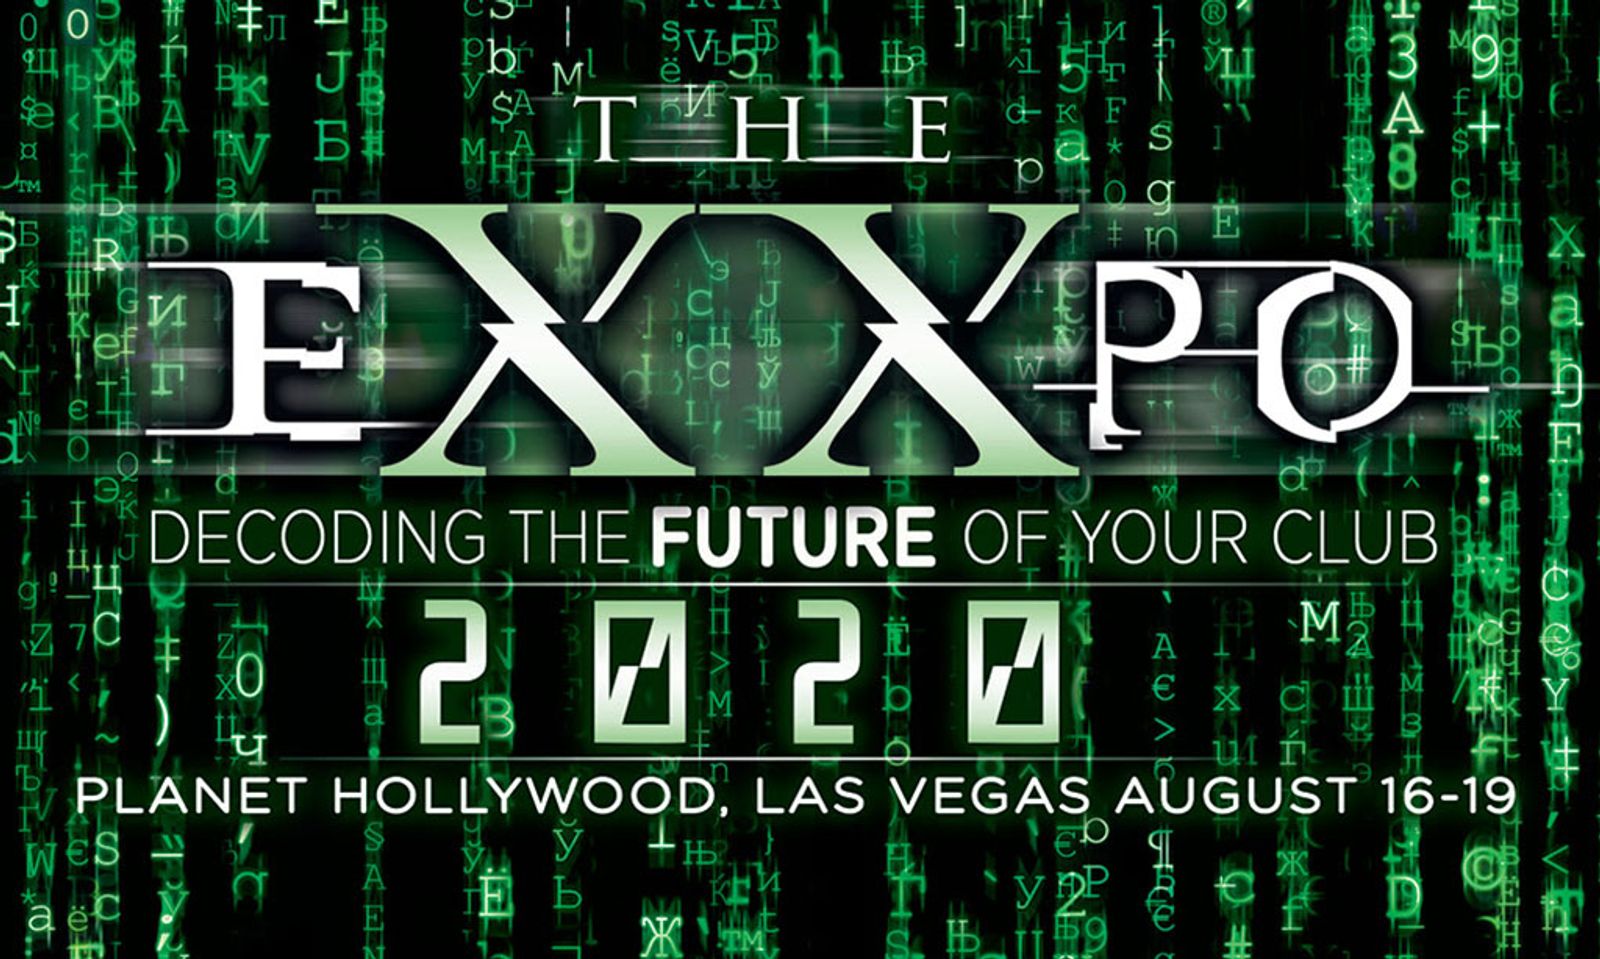 Gentlemen's Club Expo 2020 Moves Dates To Avoid Conflicts